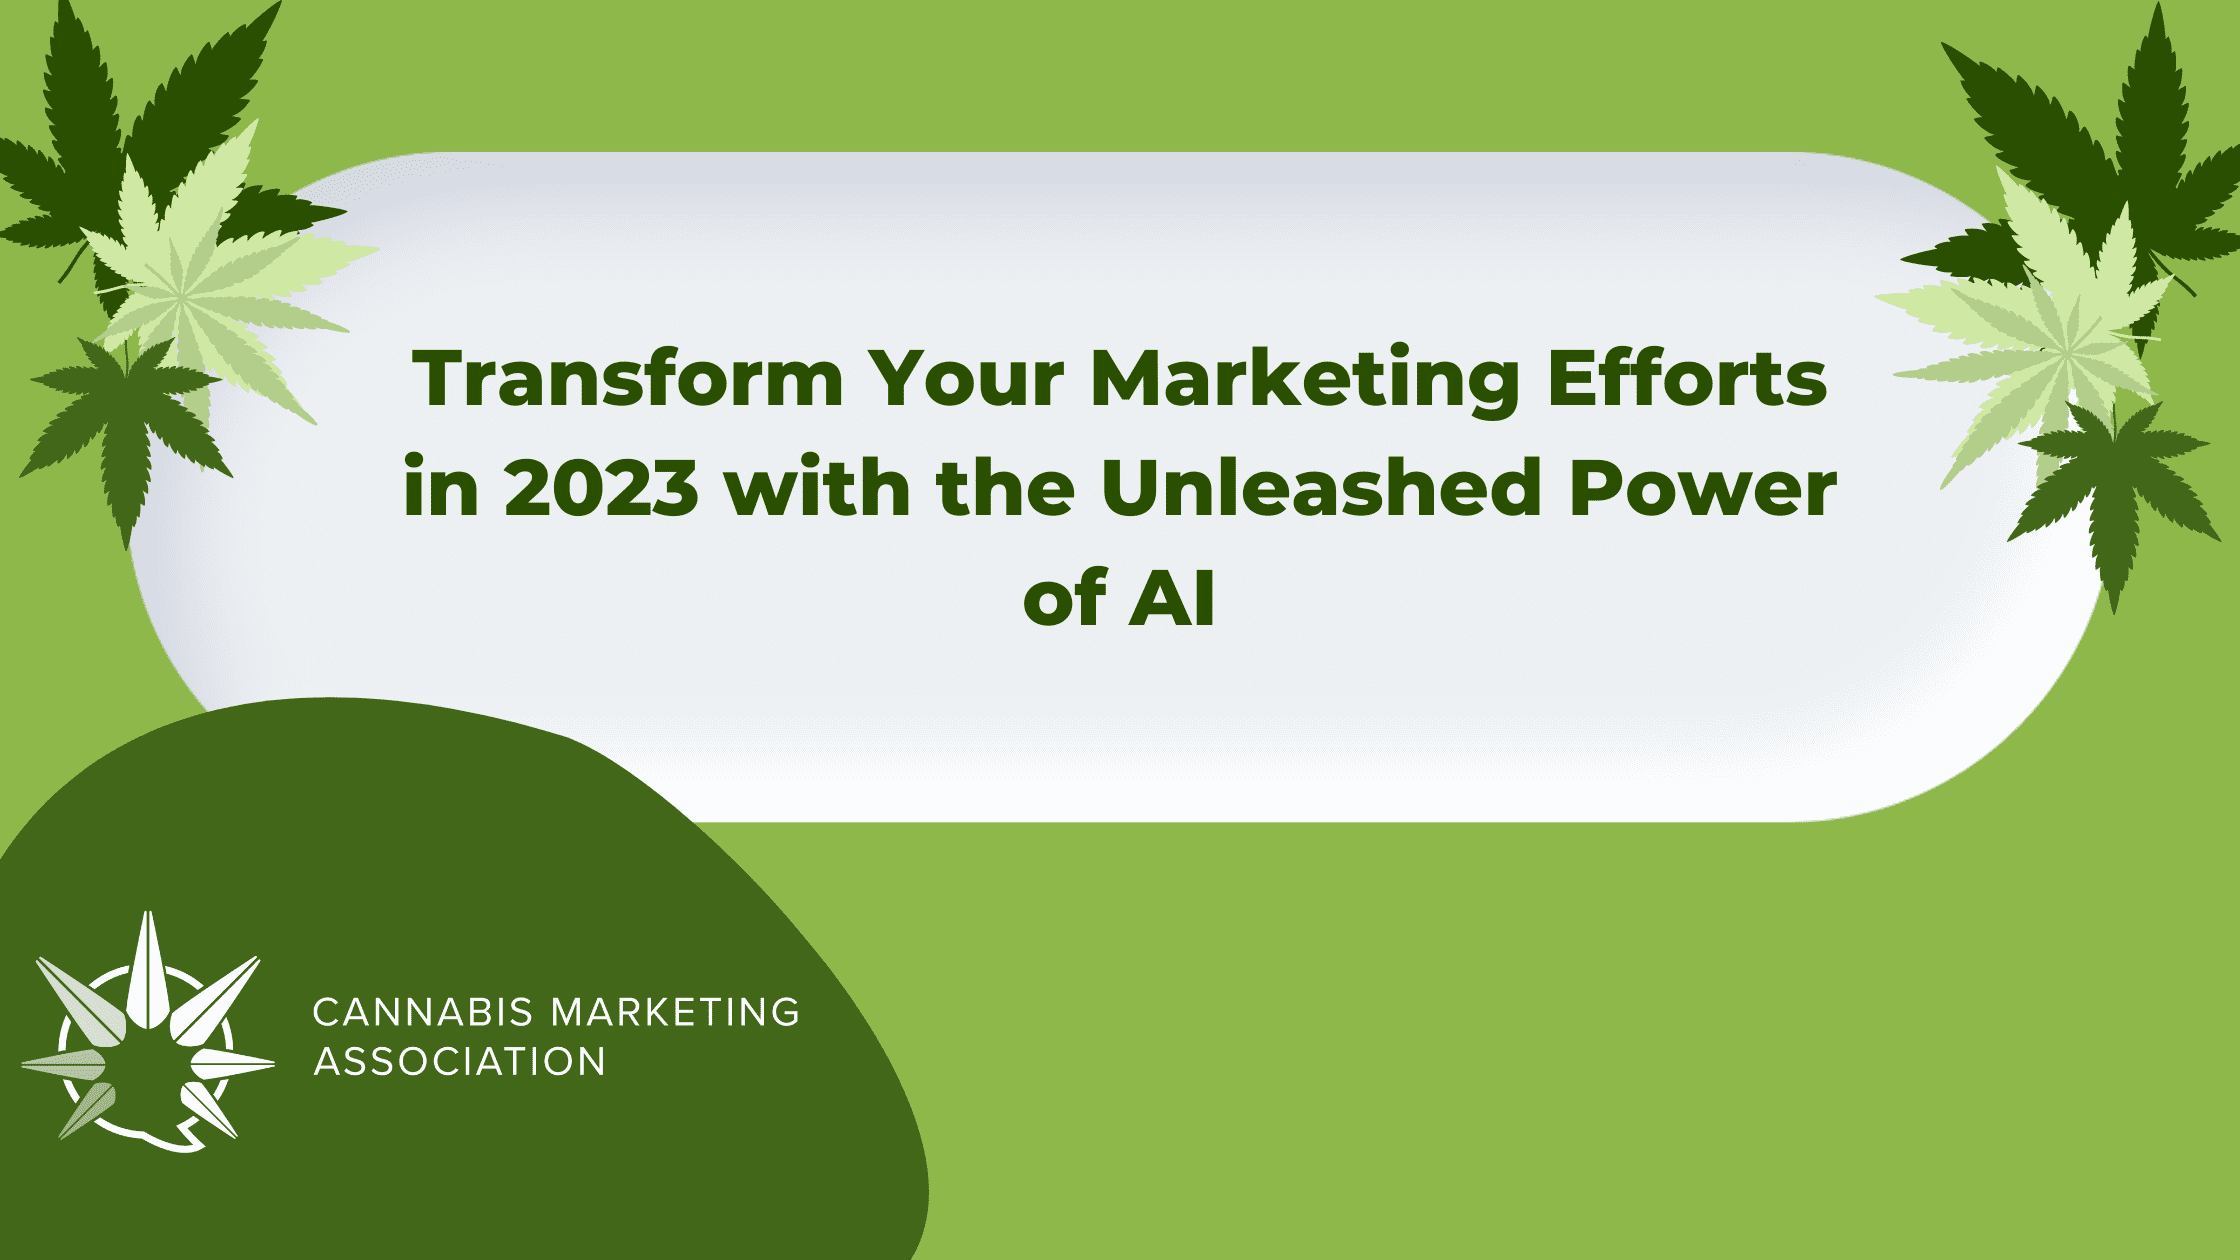 Transform Your Marketing Efforts in 2023 with the Unleashed Power of AI